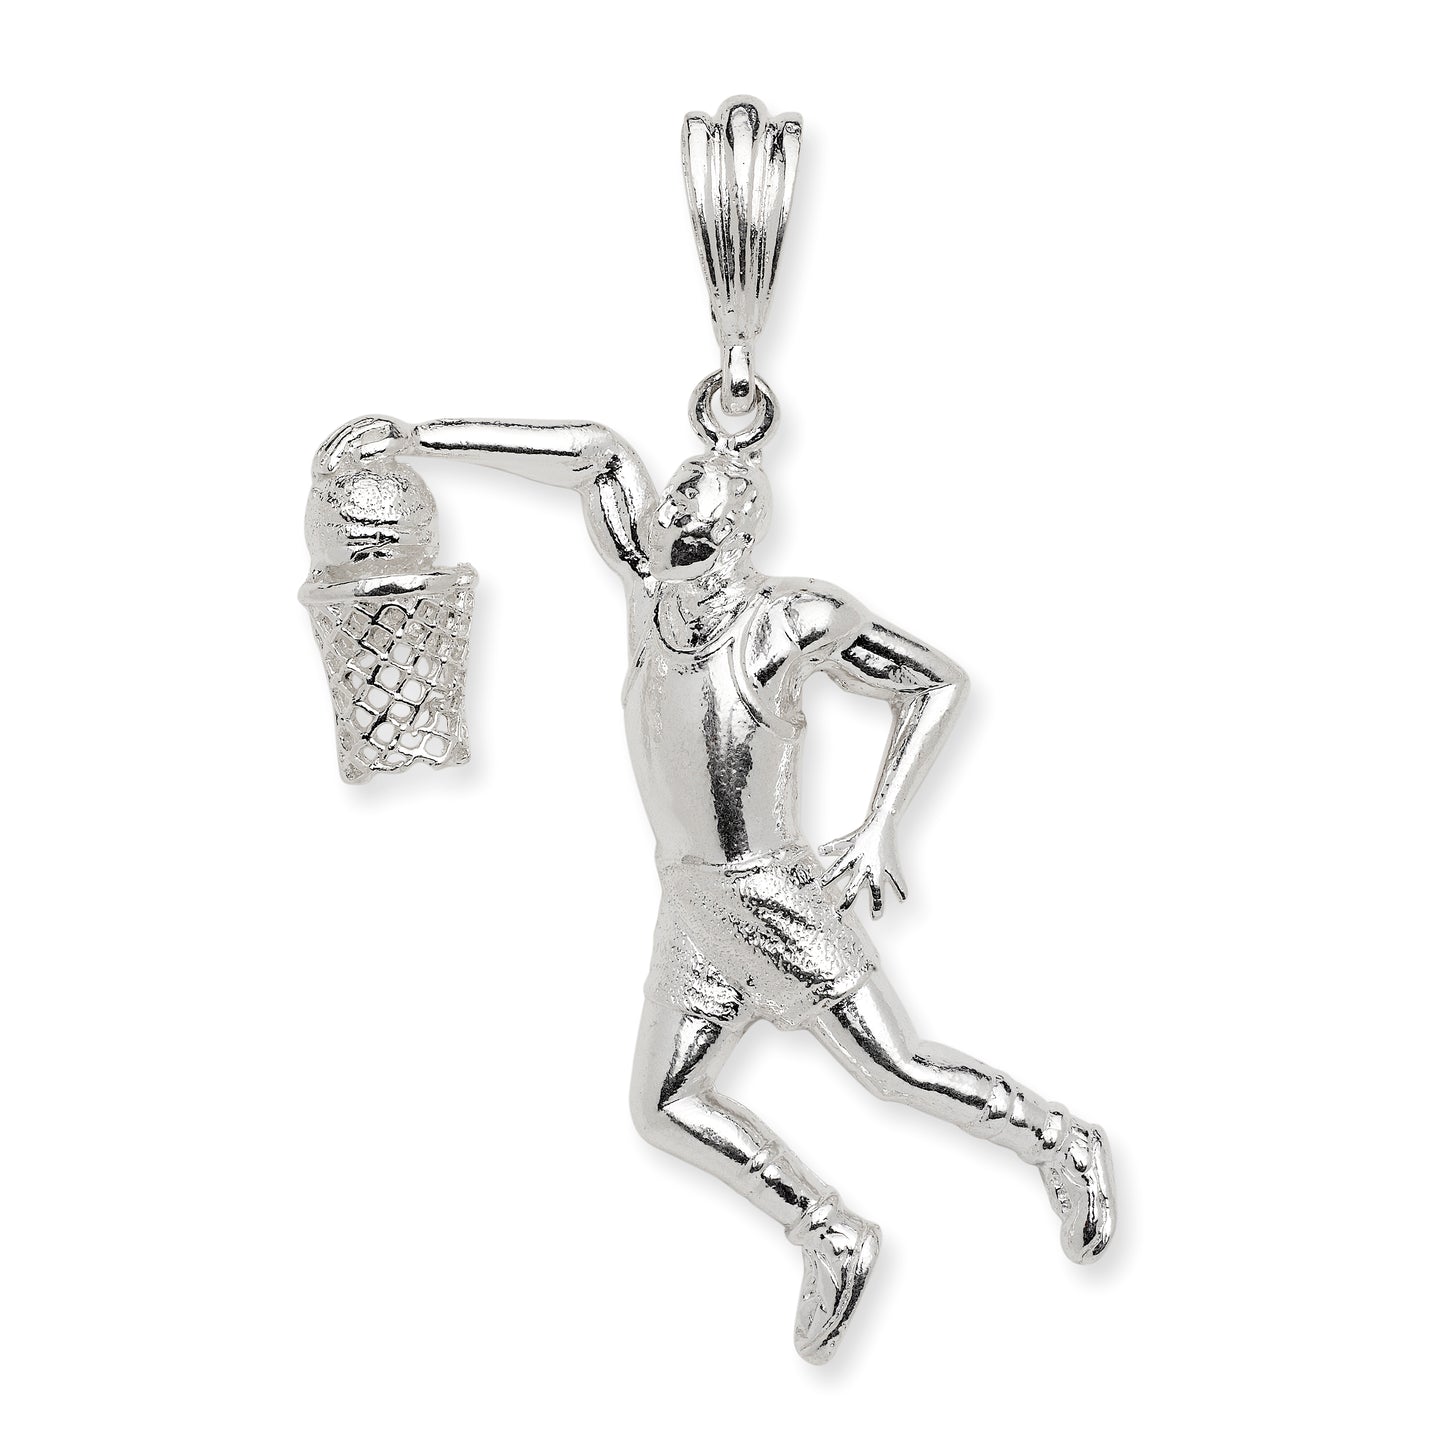 NEW! Better Jewelry .925 Sterling Silver Jump Slam Dunk Basketball Player Sports Vintage Charm Pendant